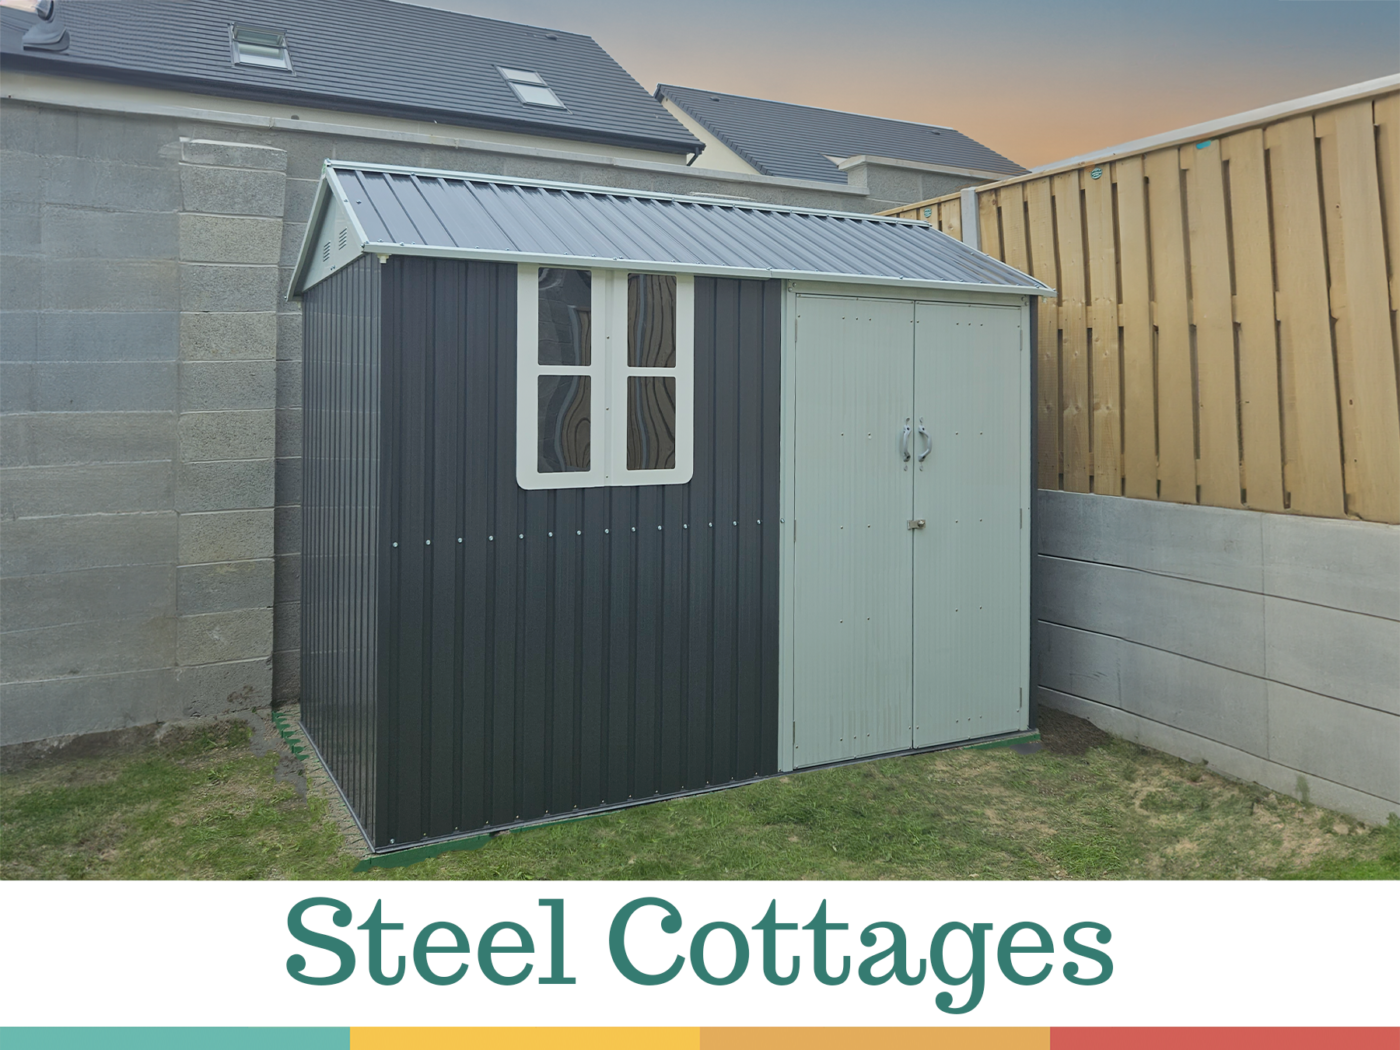 A two-tone Steel Cottage Garden Shed in a countryside garden.